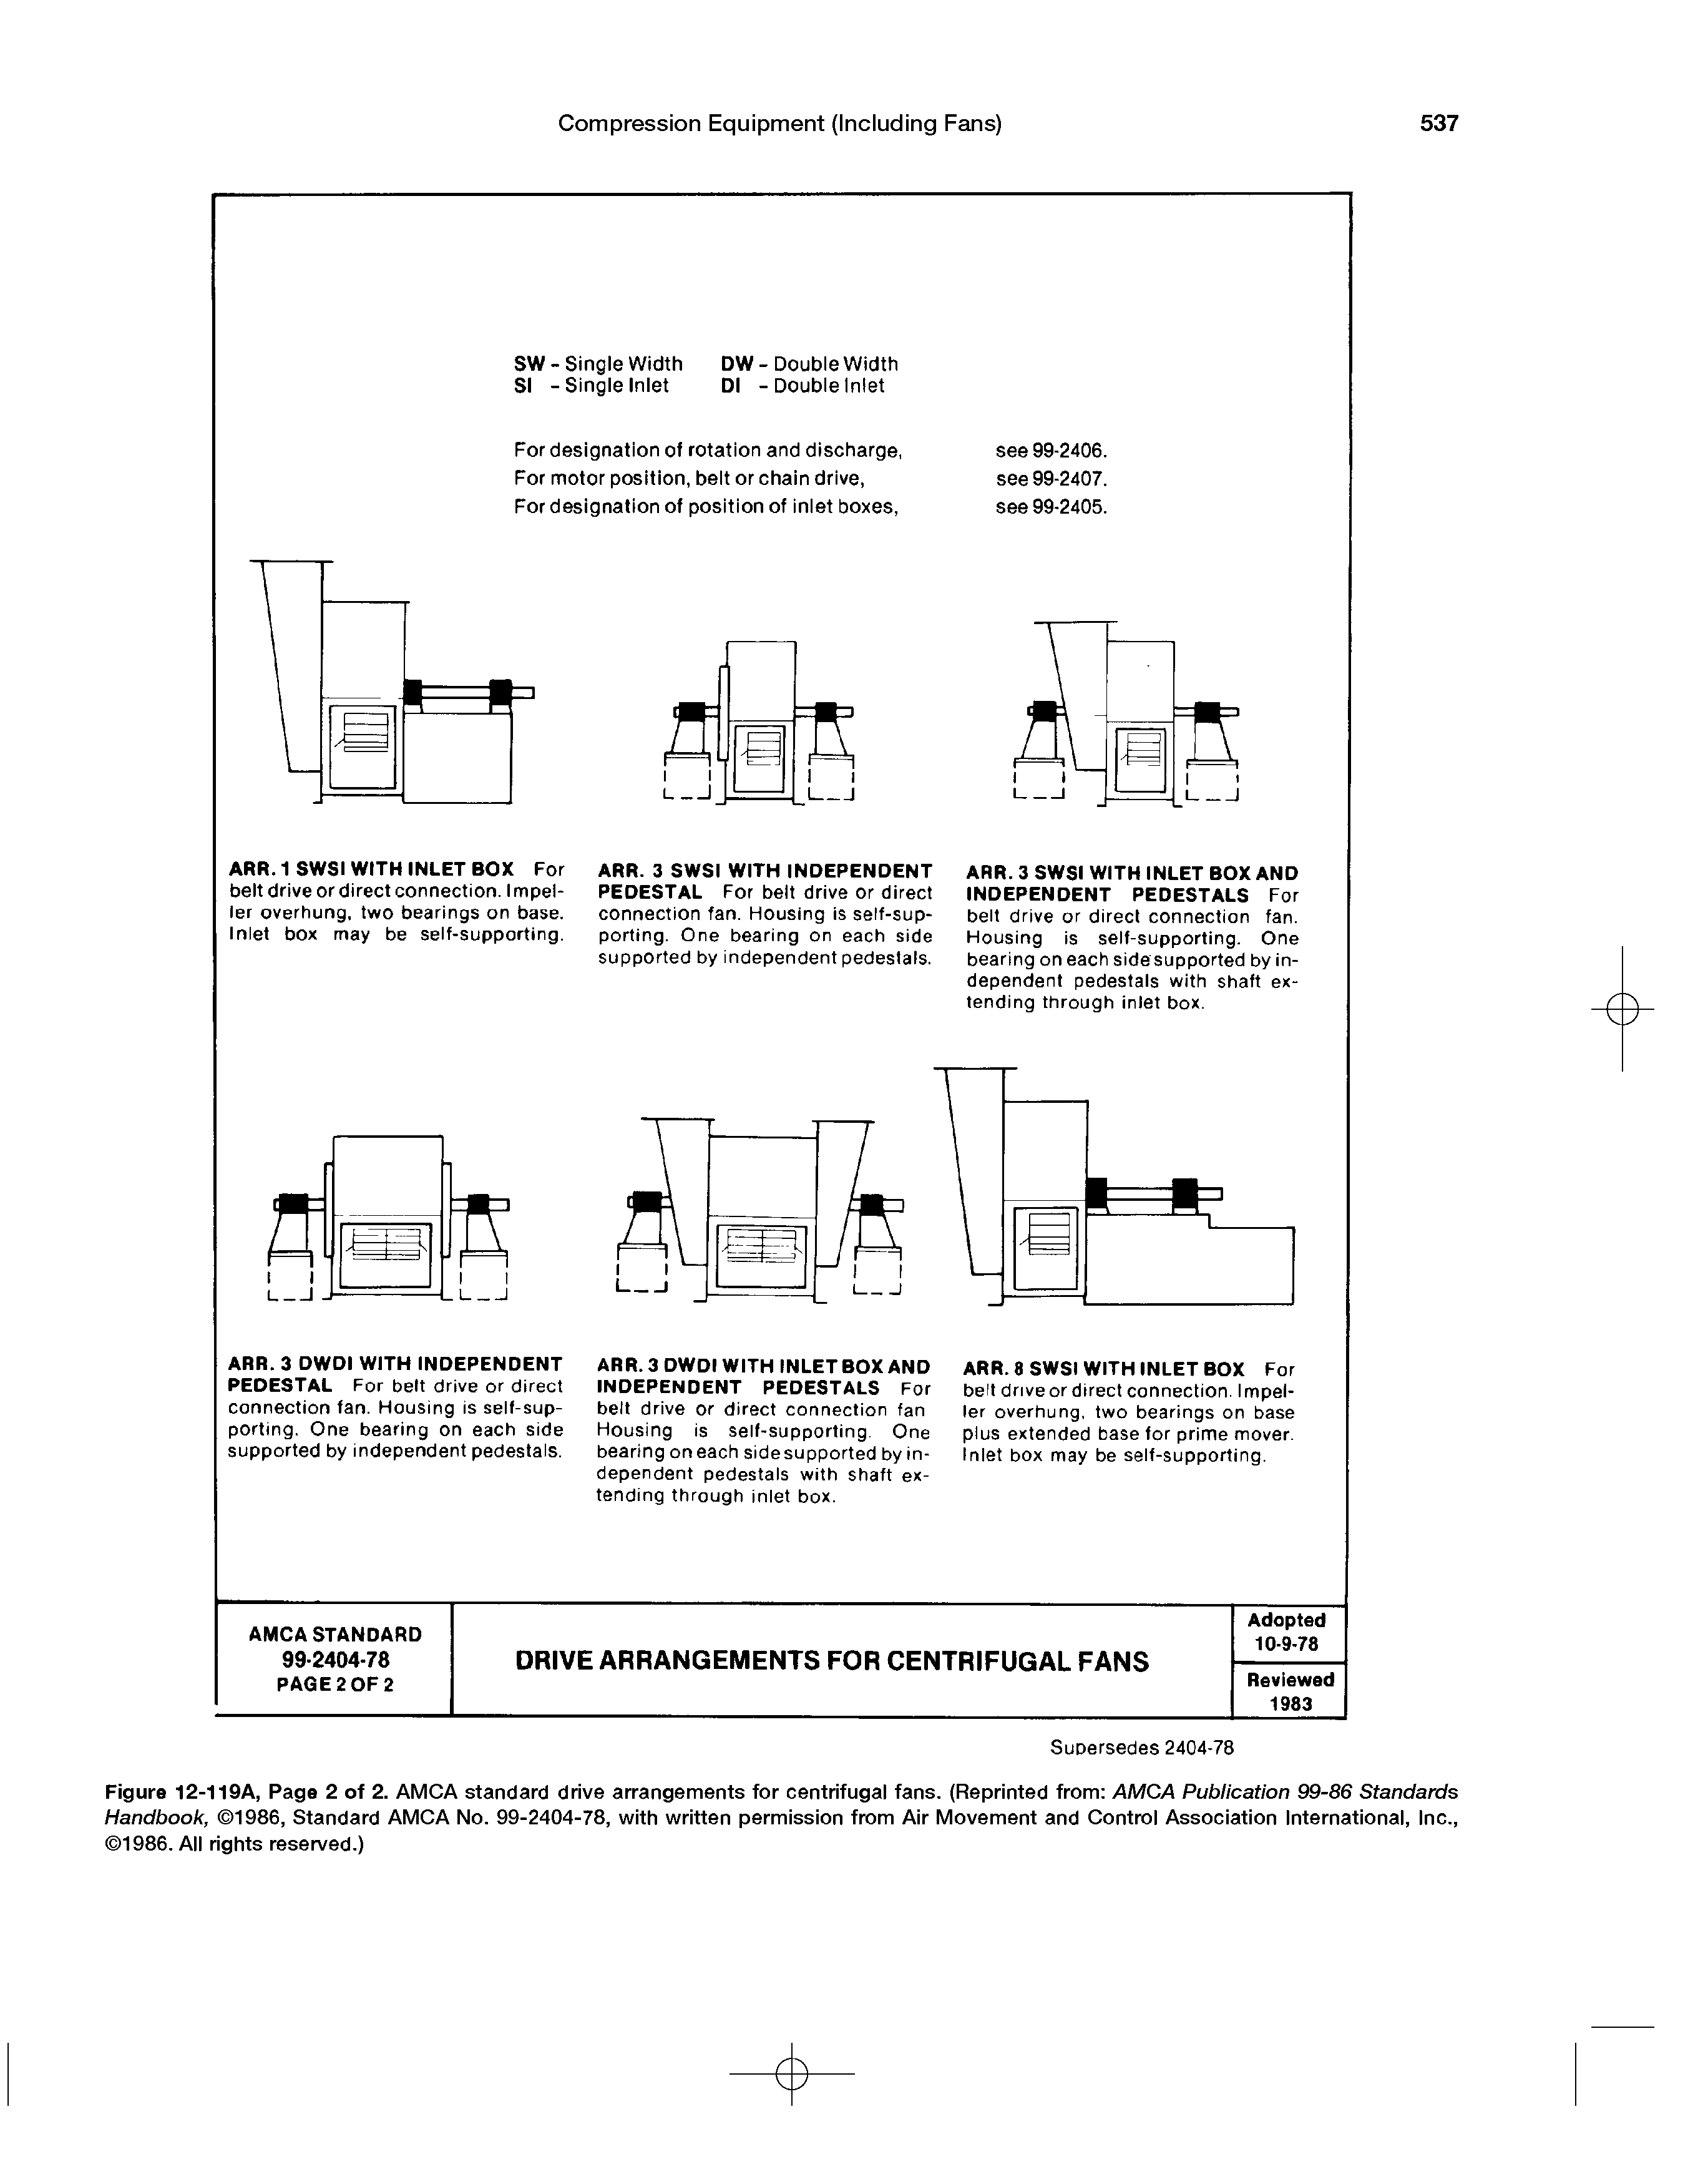 Figure 12-119A, Page 2 of 2. AMCA standard drive arrangements for centrifugal fans. (Reprinted from AMCA Publication 99-86 Standards Handbook, 1986, Standard AMCA No. 99-2404-78, with written permission from Air Movement and Control Association International, Inc., 1986. All rights reserved.)...